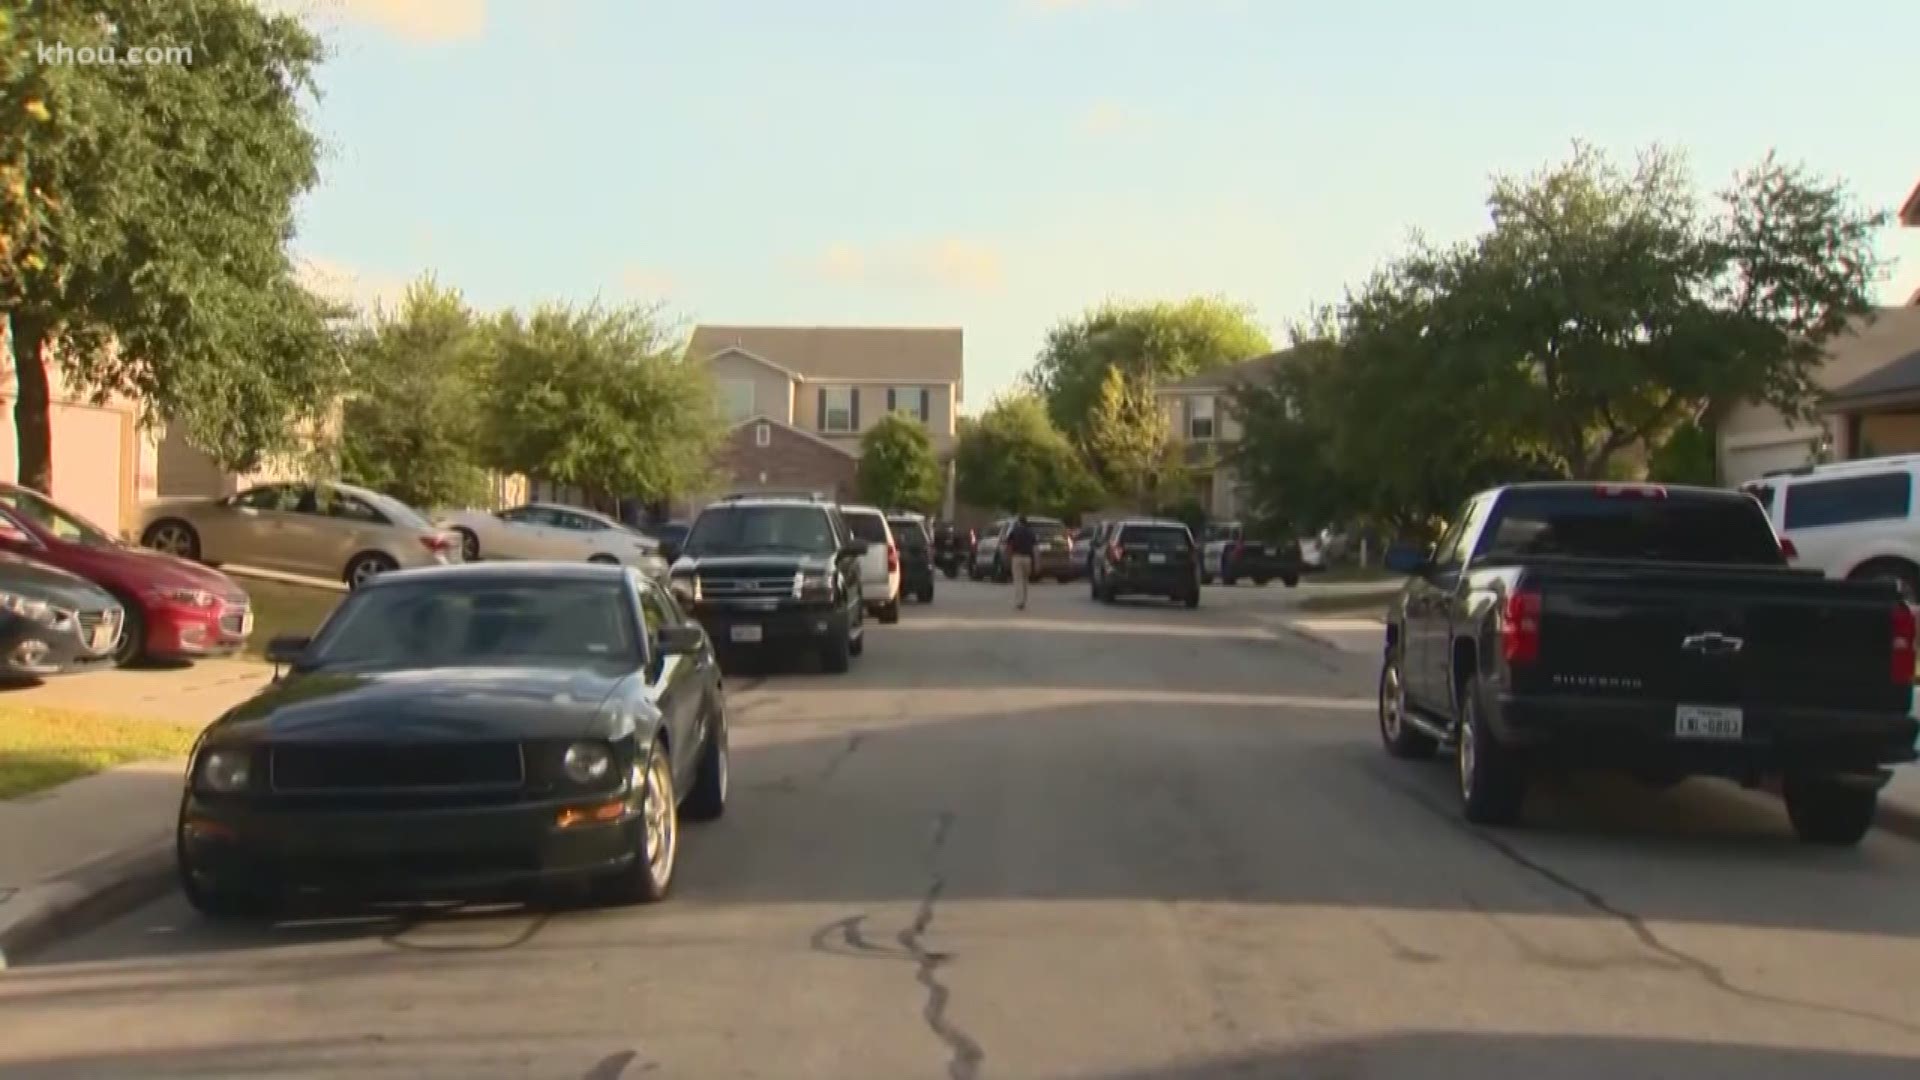 In an incident they are calling an awful accident, San Antonio Police say a 3-year-old boy died after being left in a hot car on Saturday afternoon.